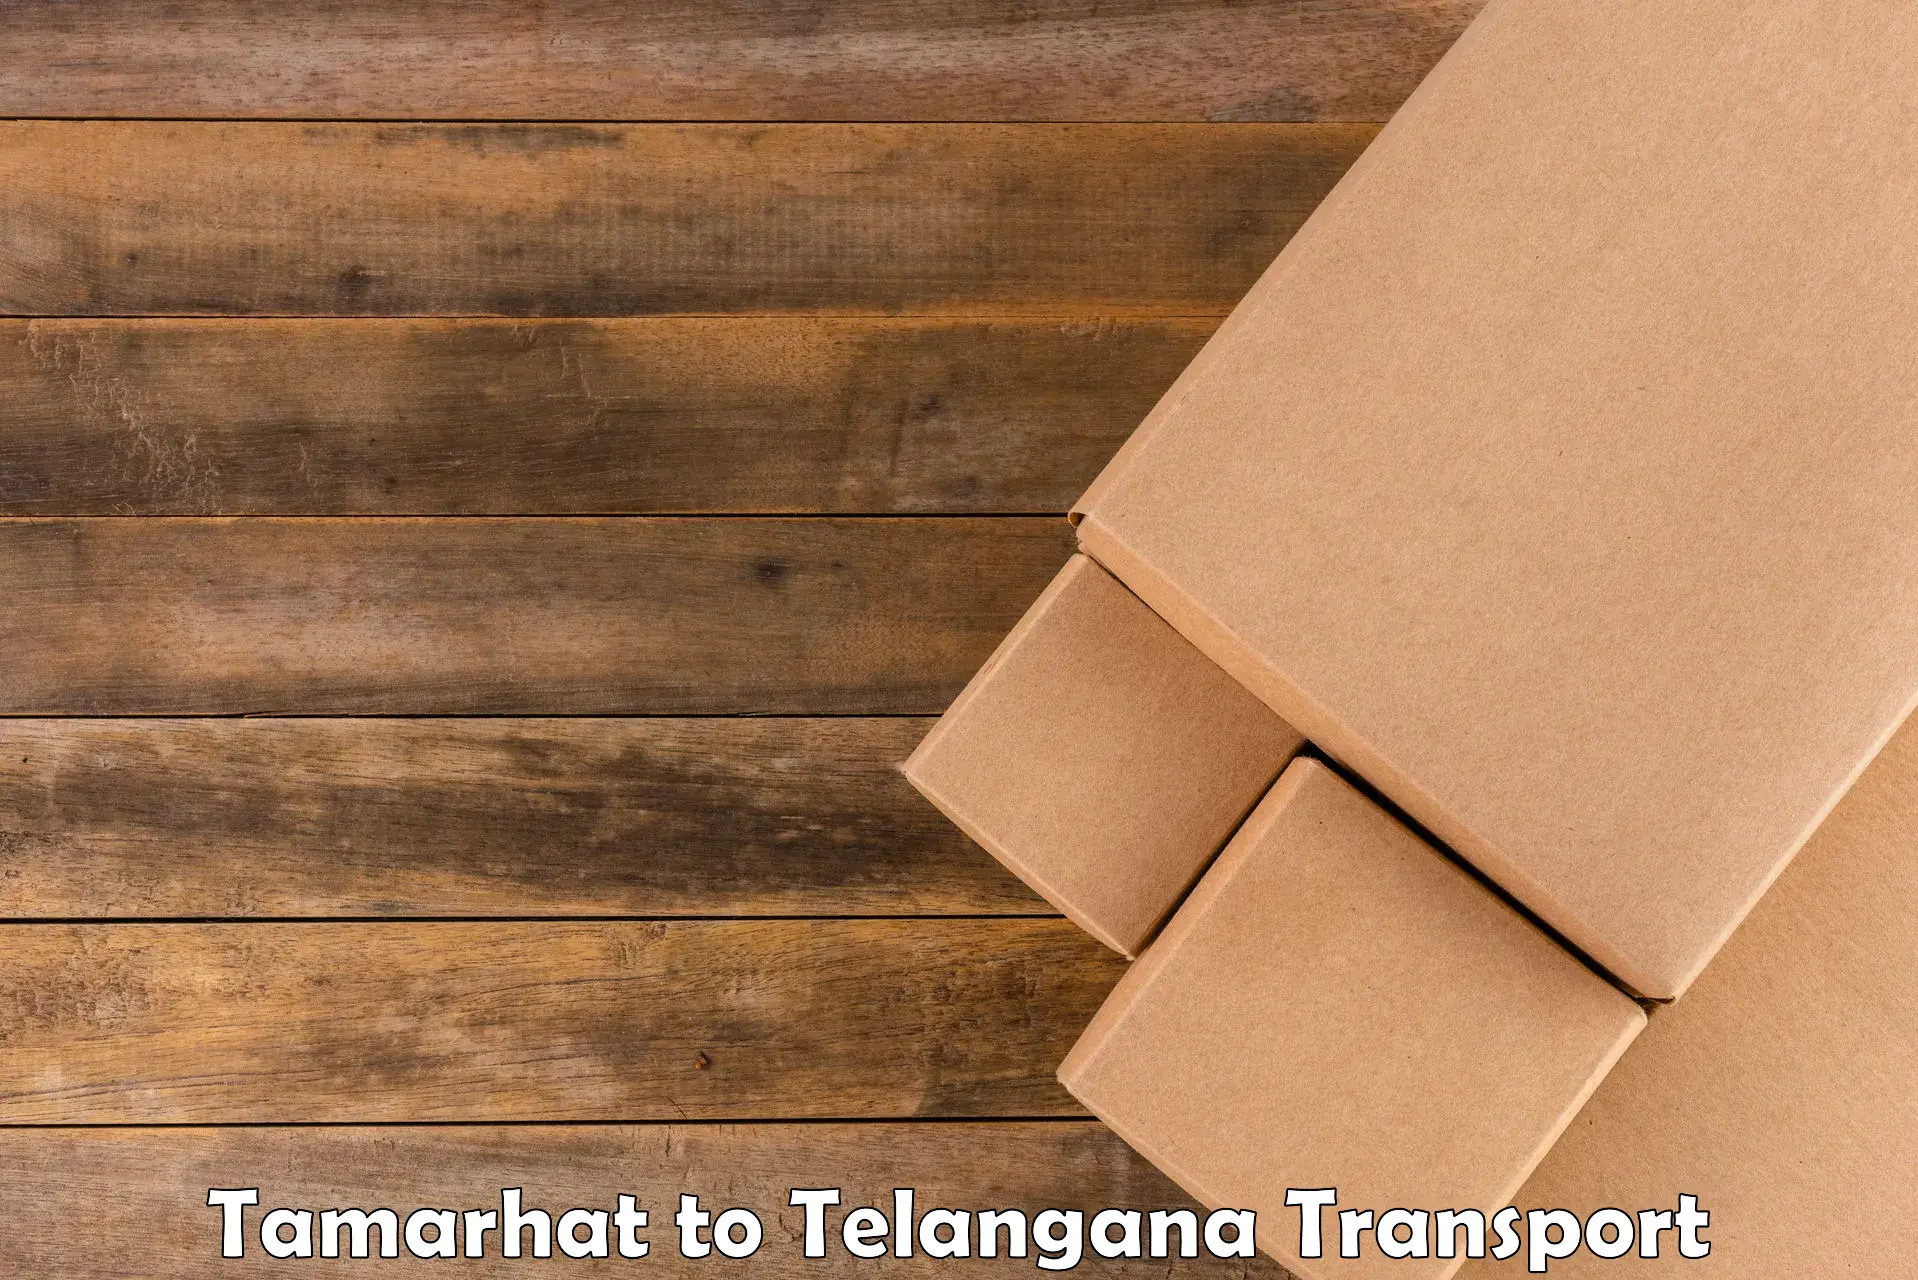 Delivery service in Tamarhat to Yellandu